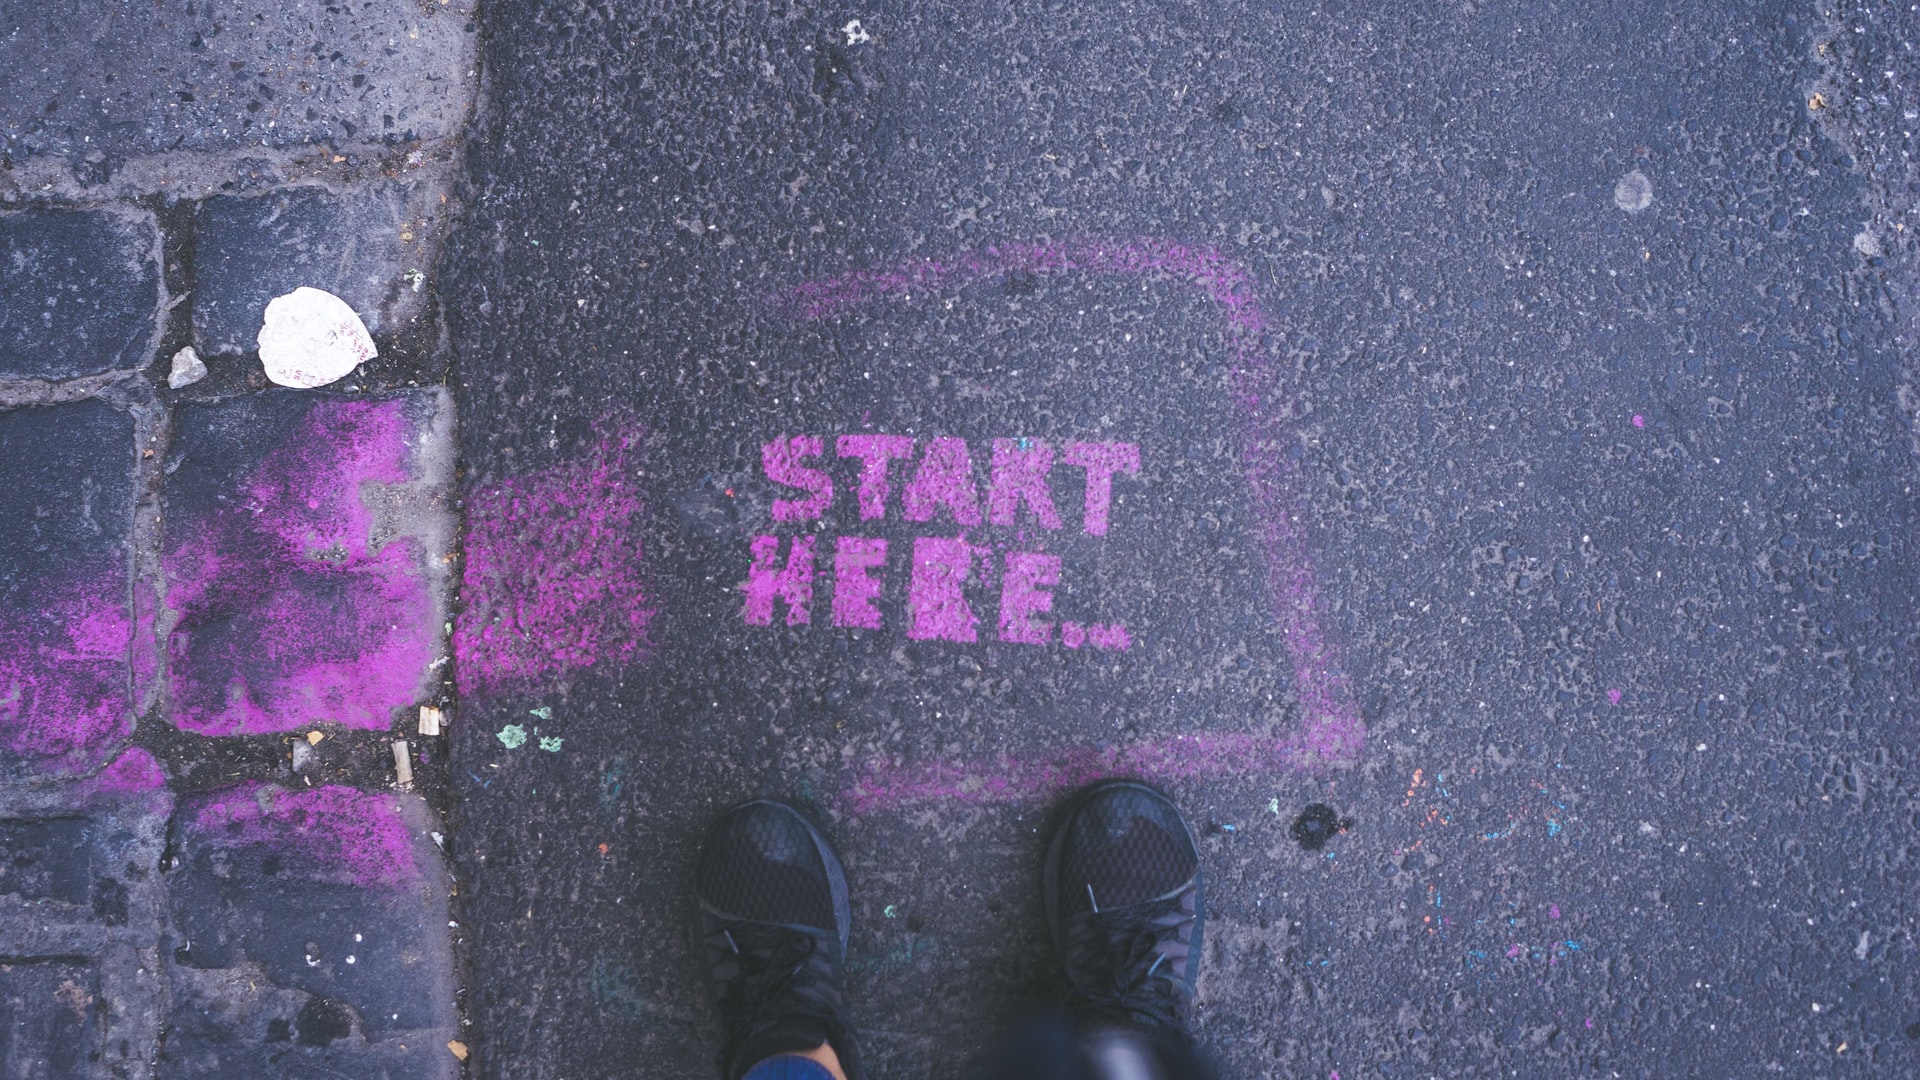 &quot;Start Here&quot; in purple paint on the pavement